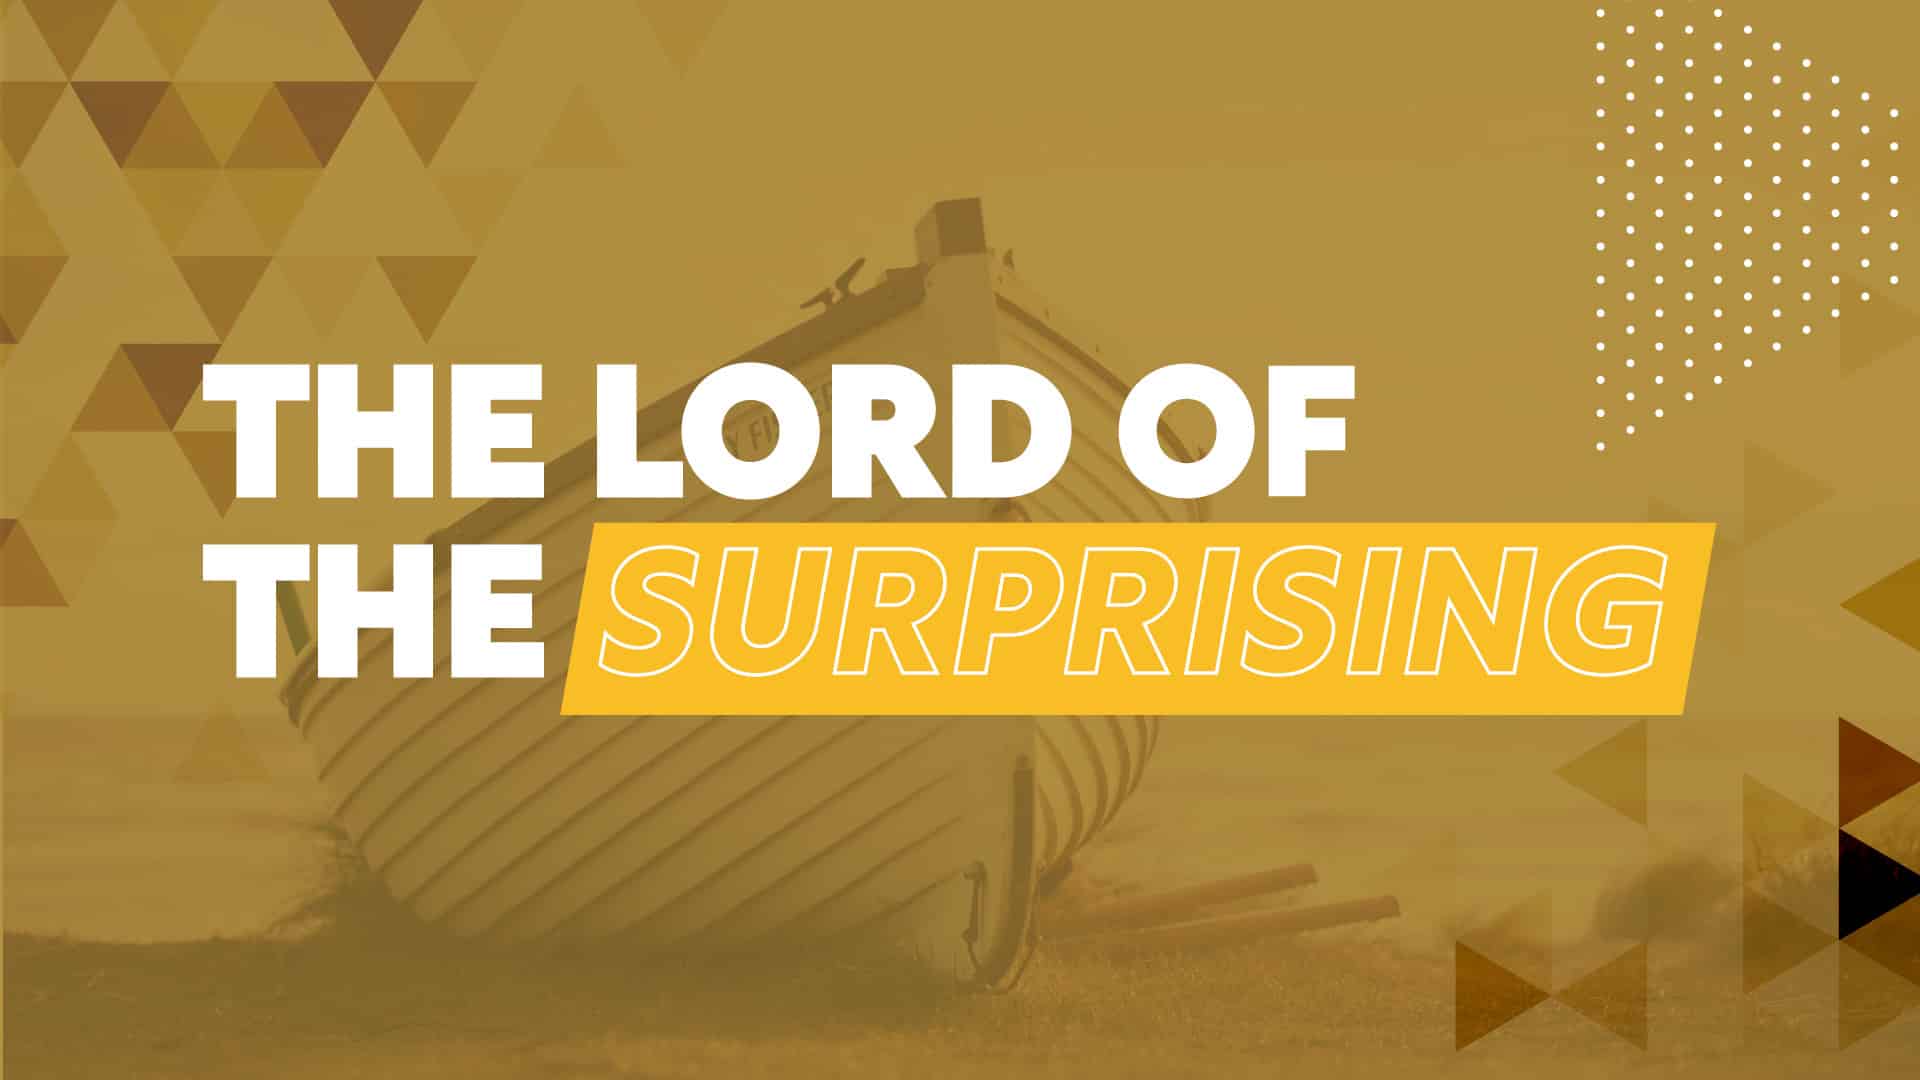 The Lord of the Surprising